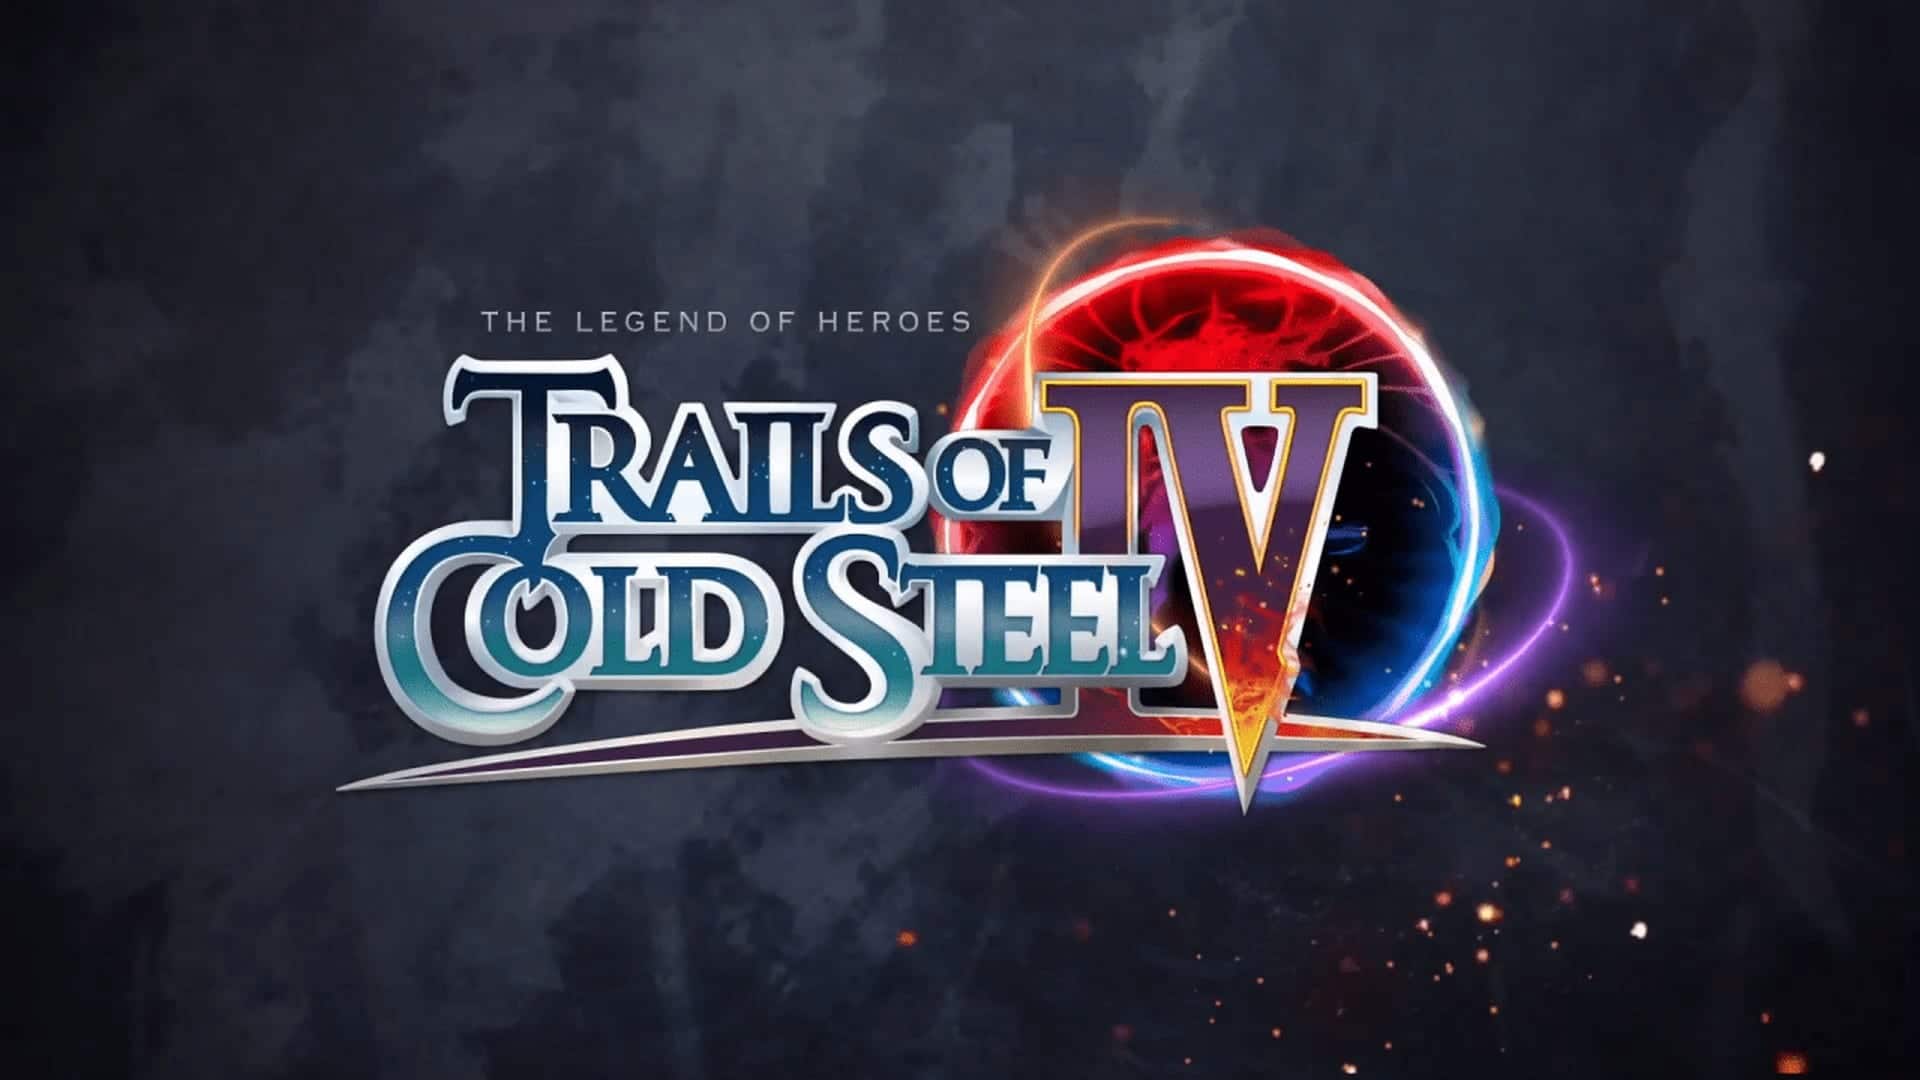 The Legend of Heroes Trails of Cold Steel IV - GamersRD